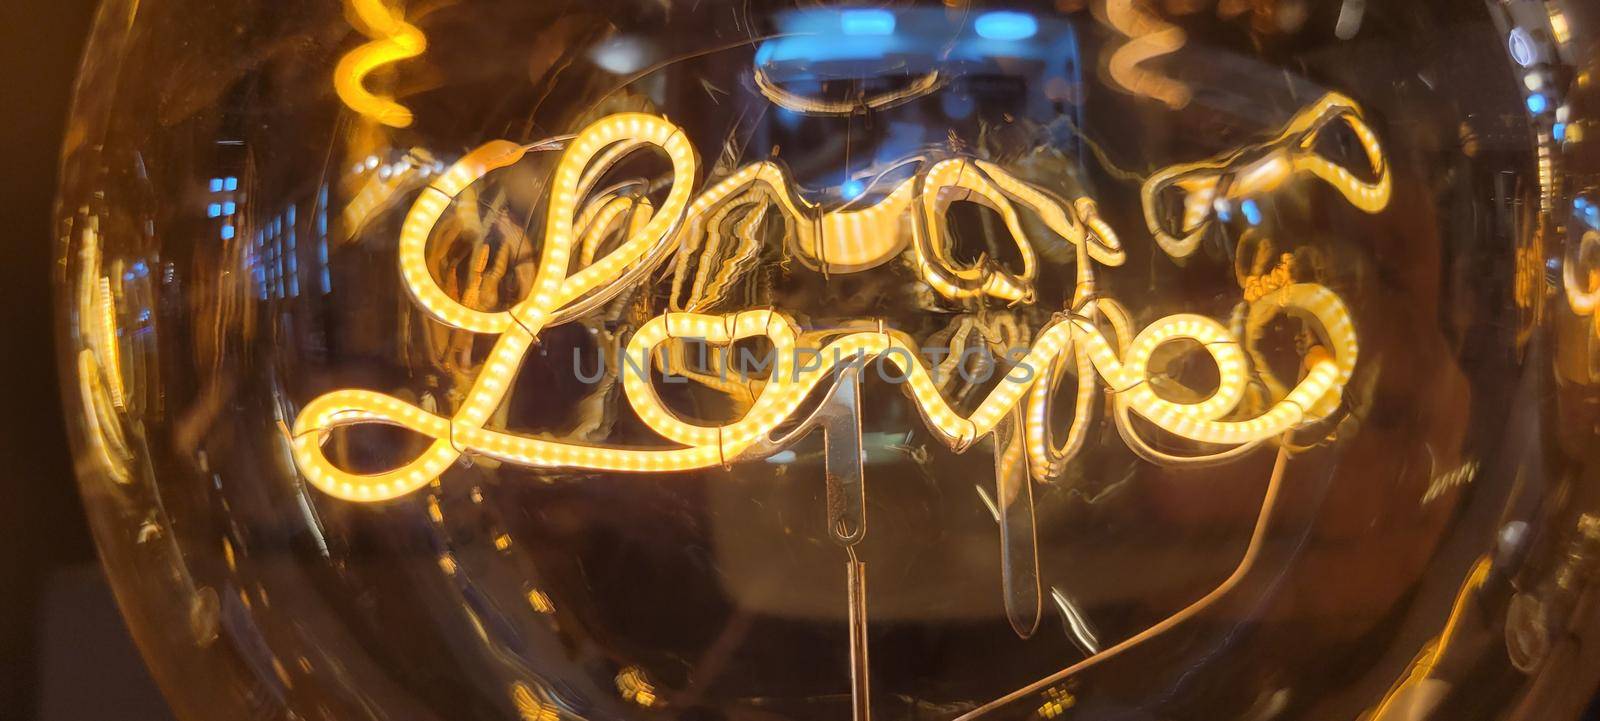 romantic filament lighting with the word love by sarsa